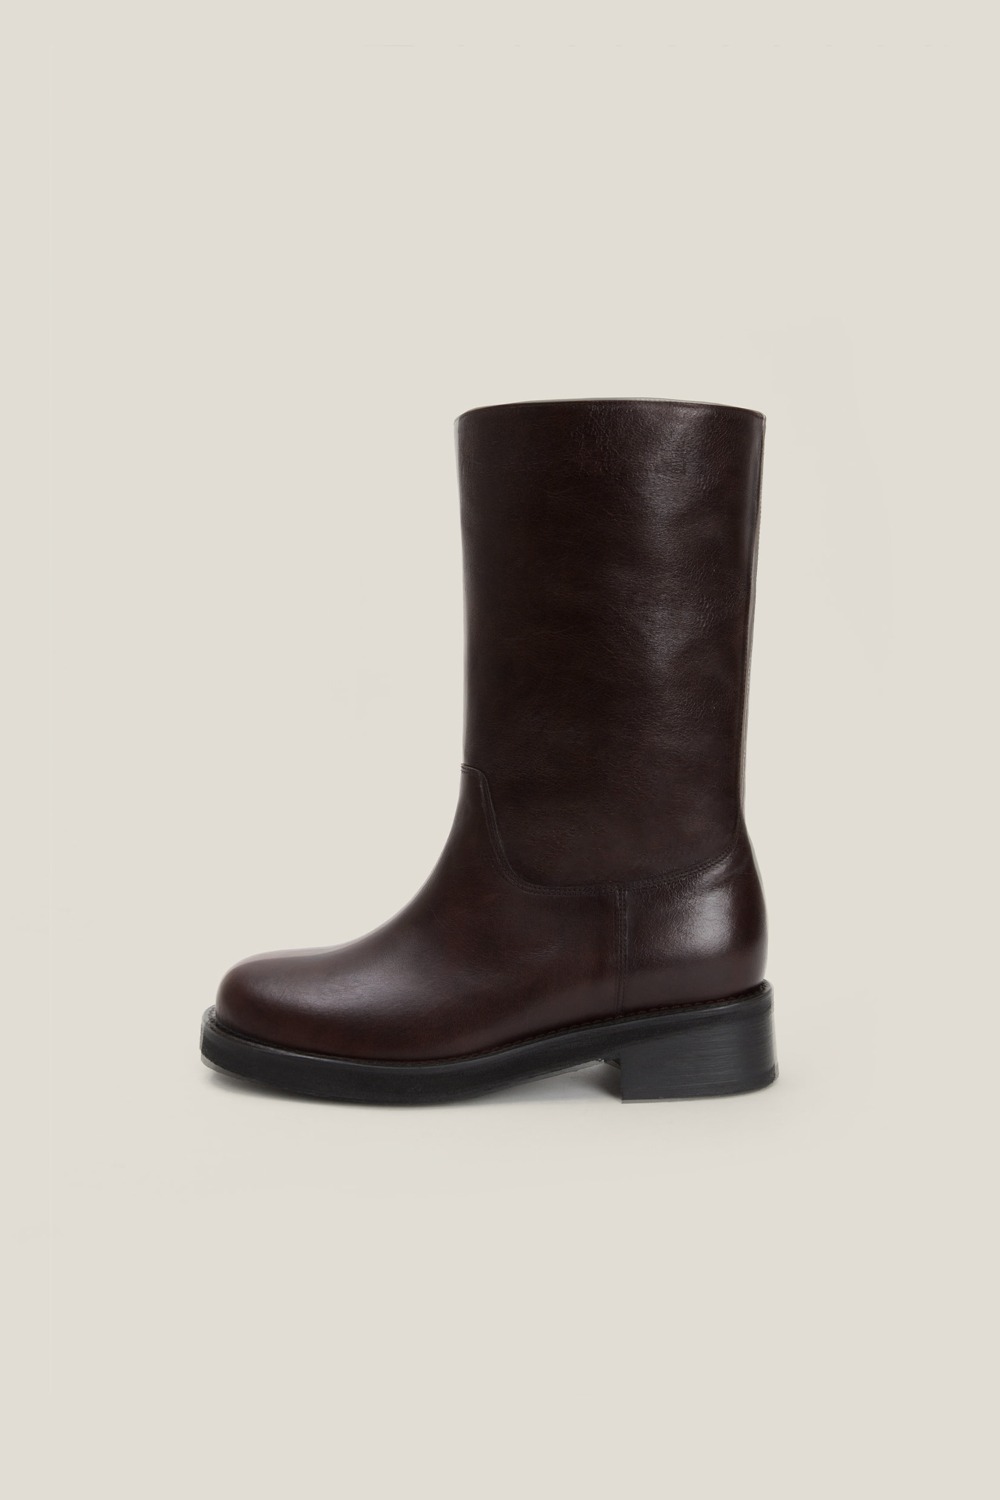 BOROUGH MIDDLE BOOTS - BROWN